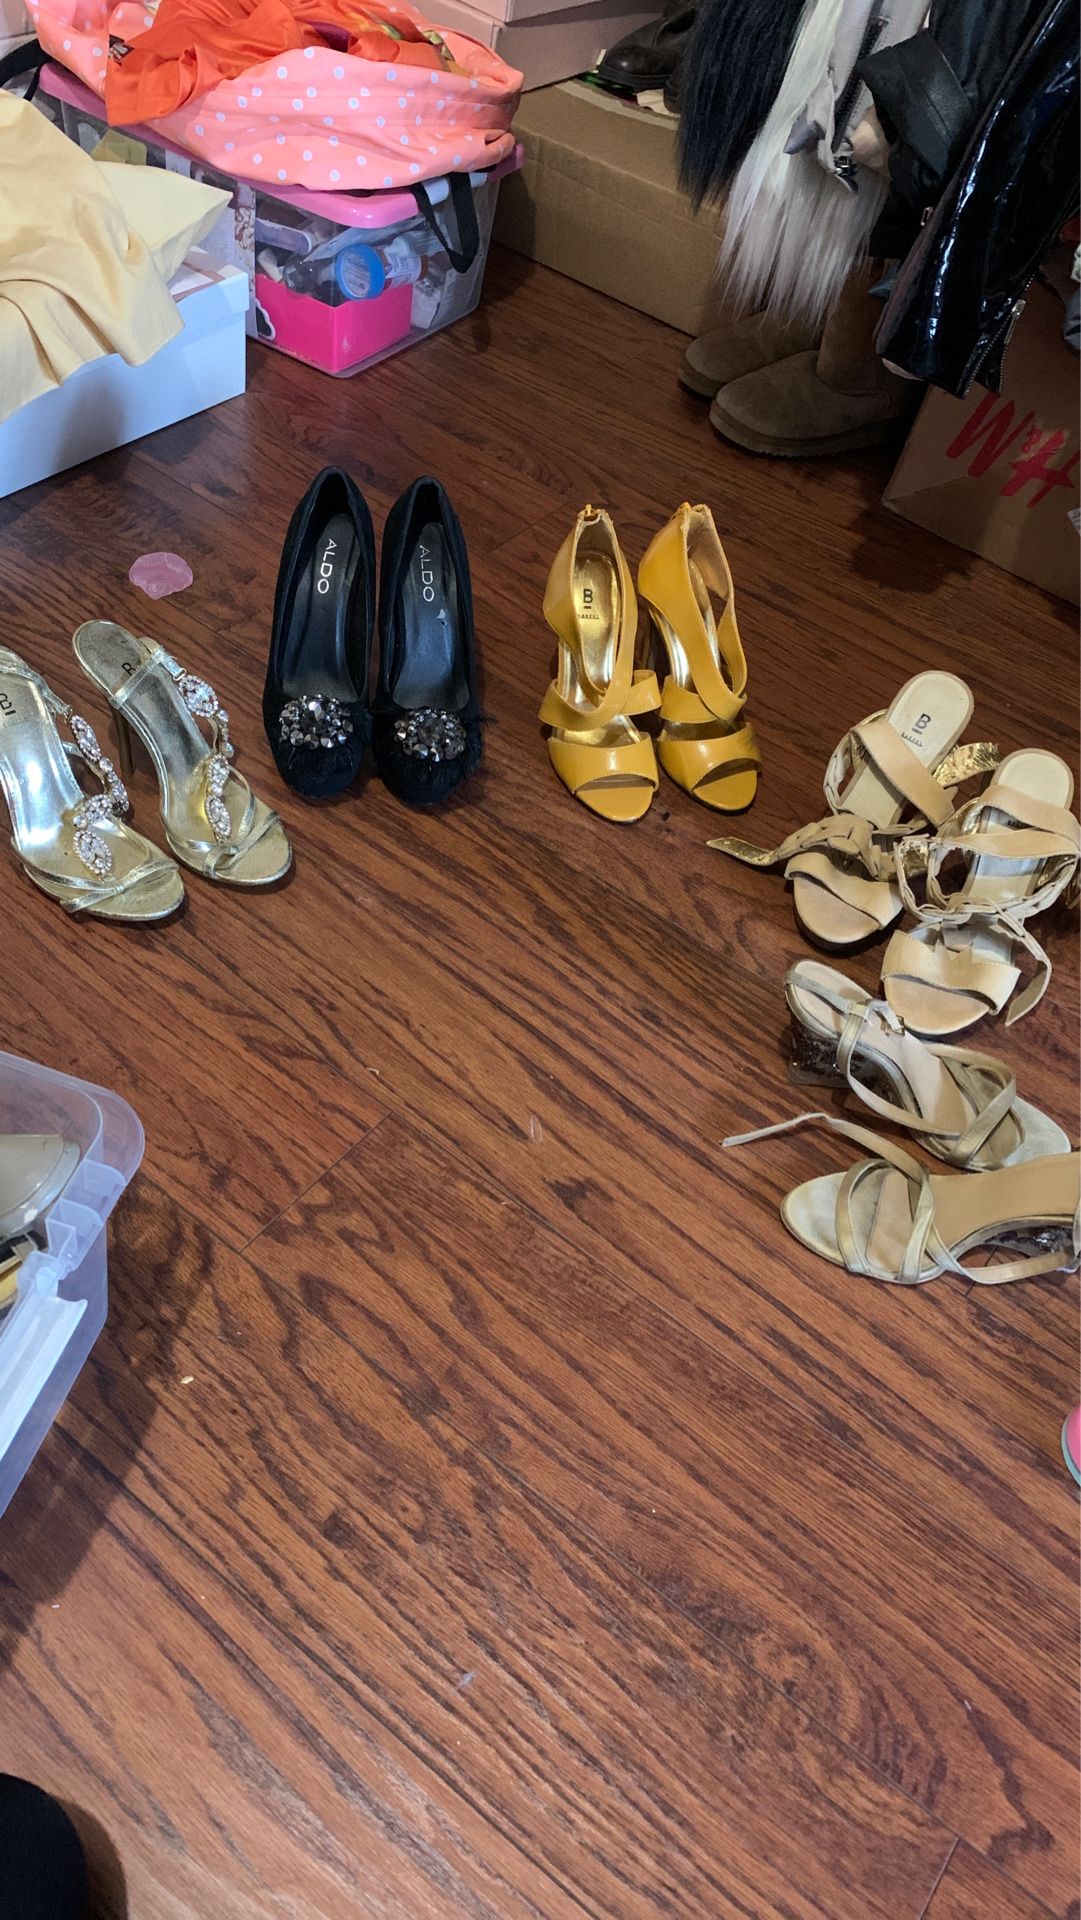 Heels $20 for all. Size 5